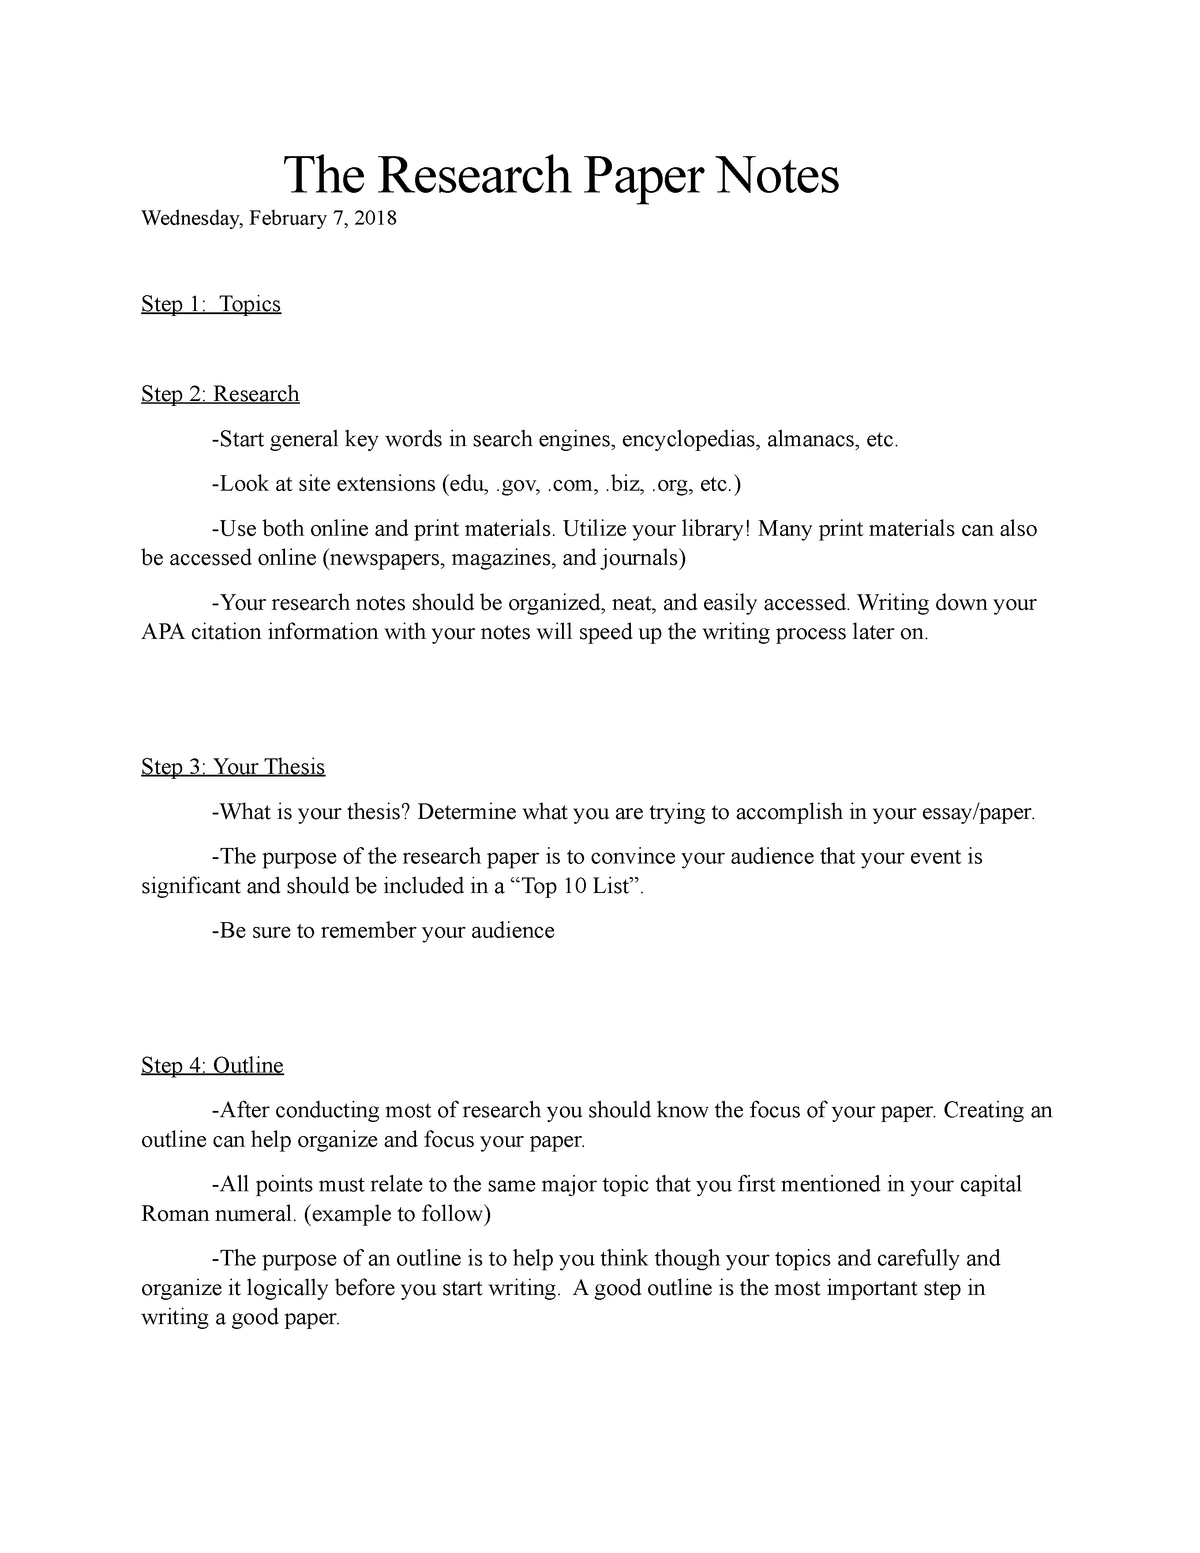 how to write research paper notes